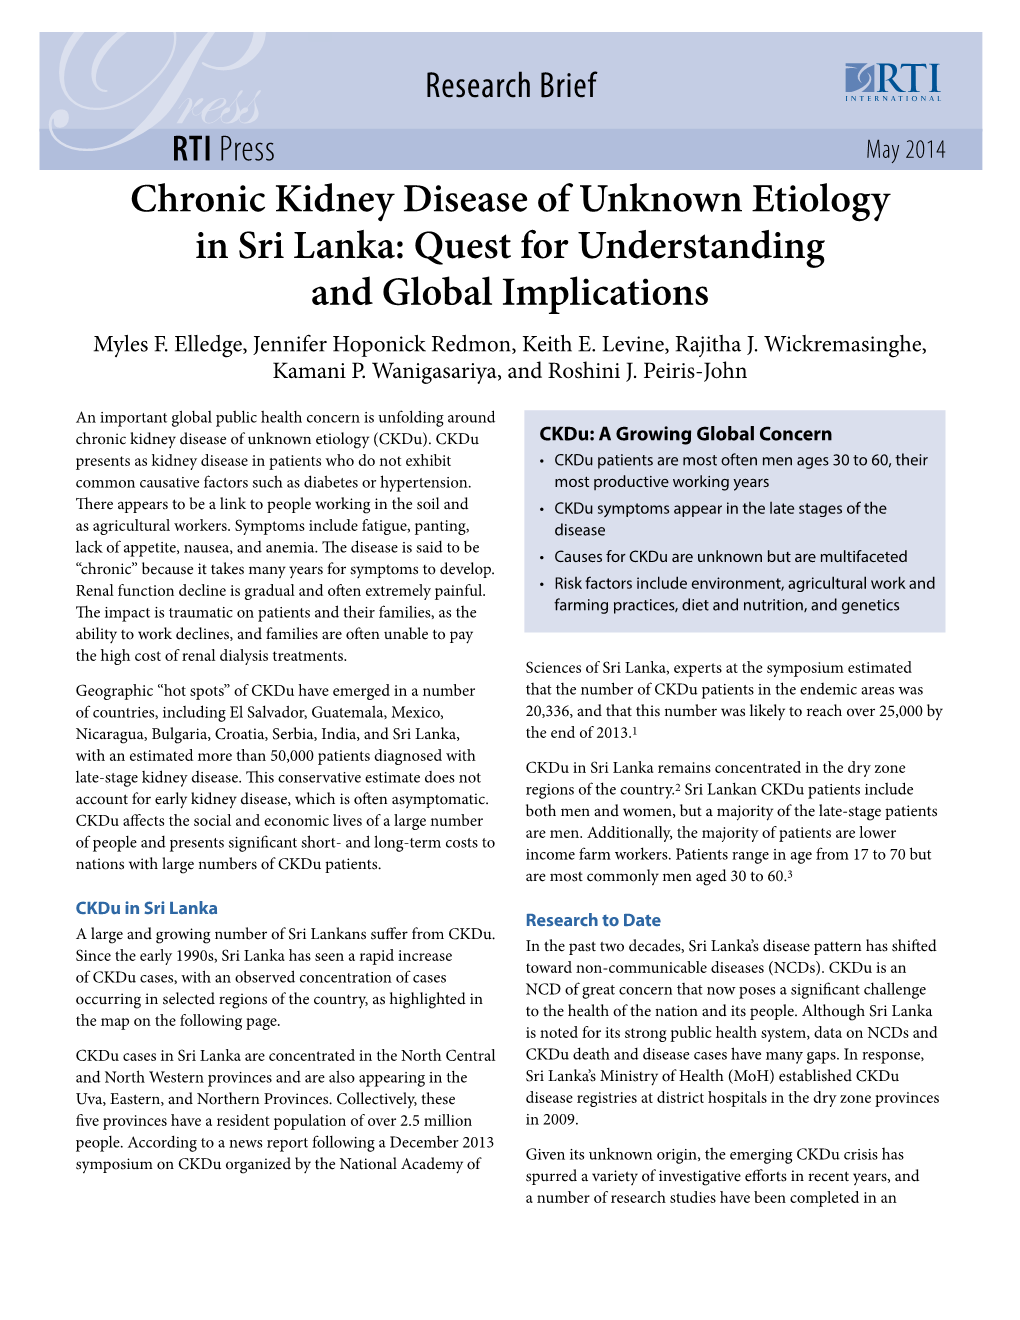 Chronic Kidney Disease of Unknown Etiology in Sri Lanka: Quest for Understanding and Global Implications Myles F